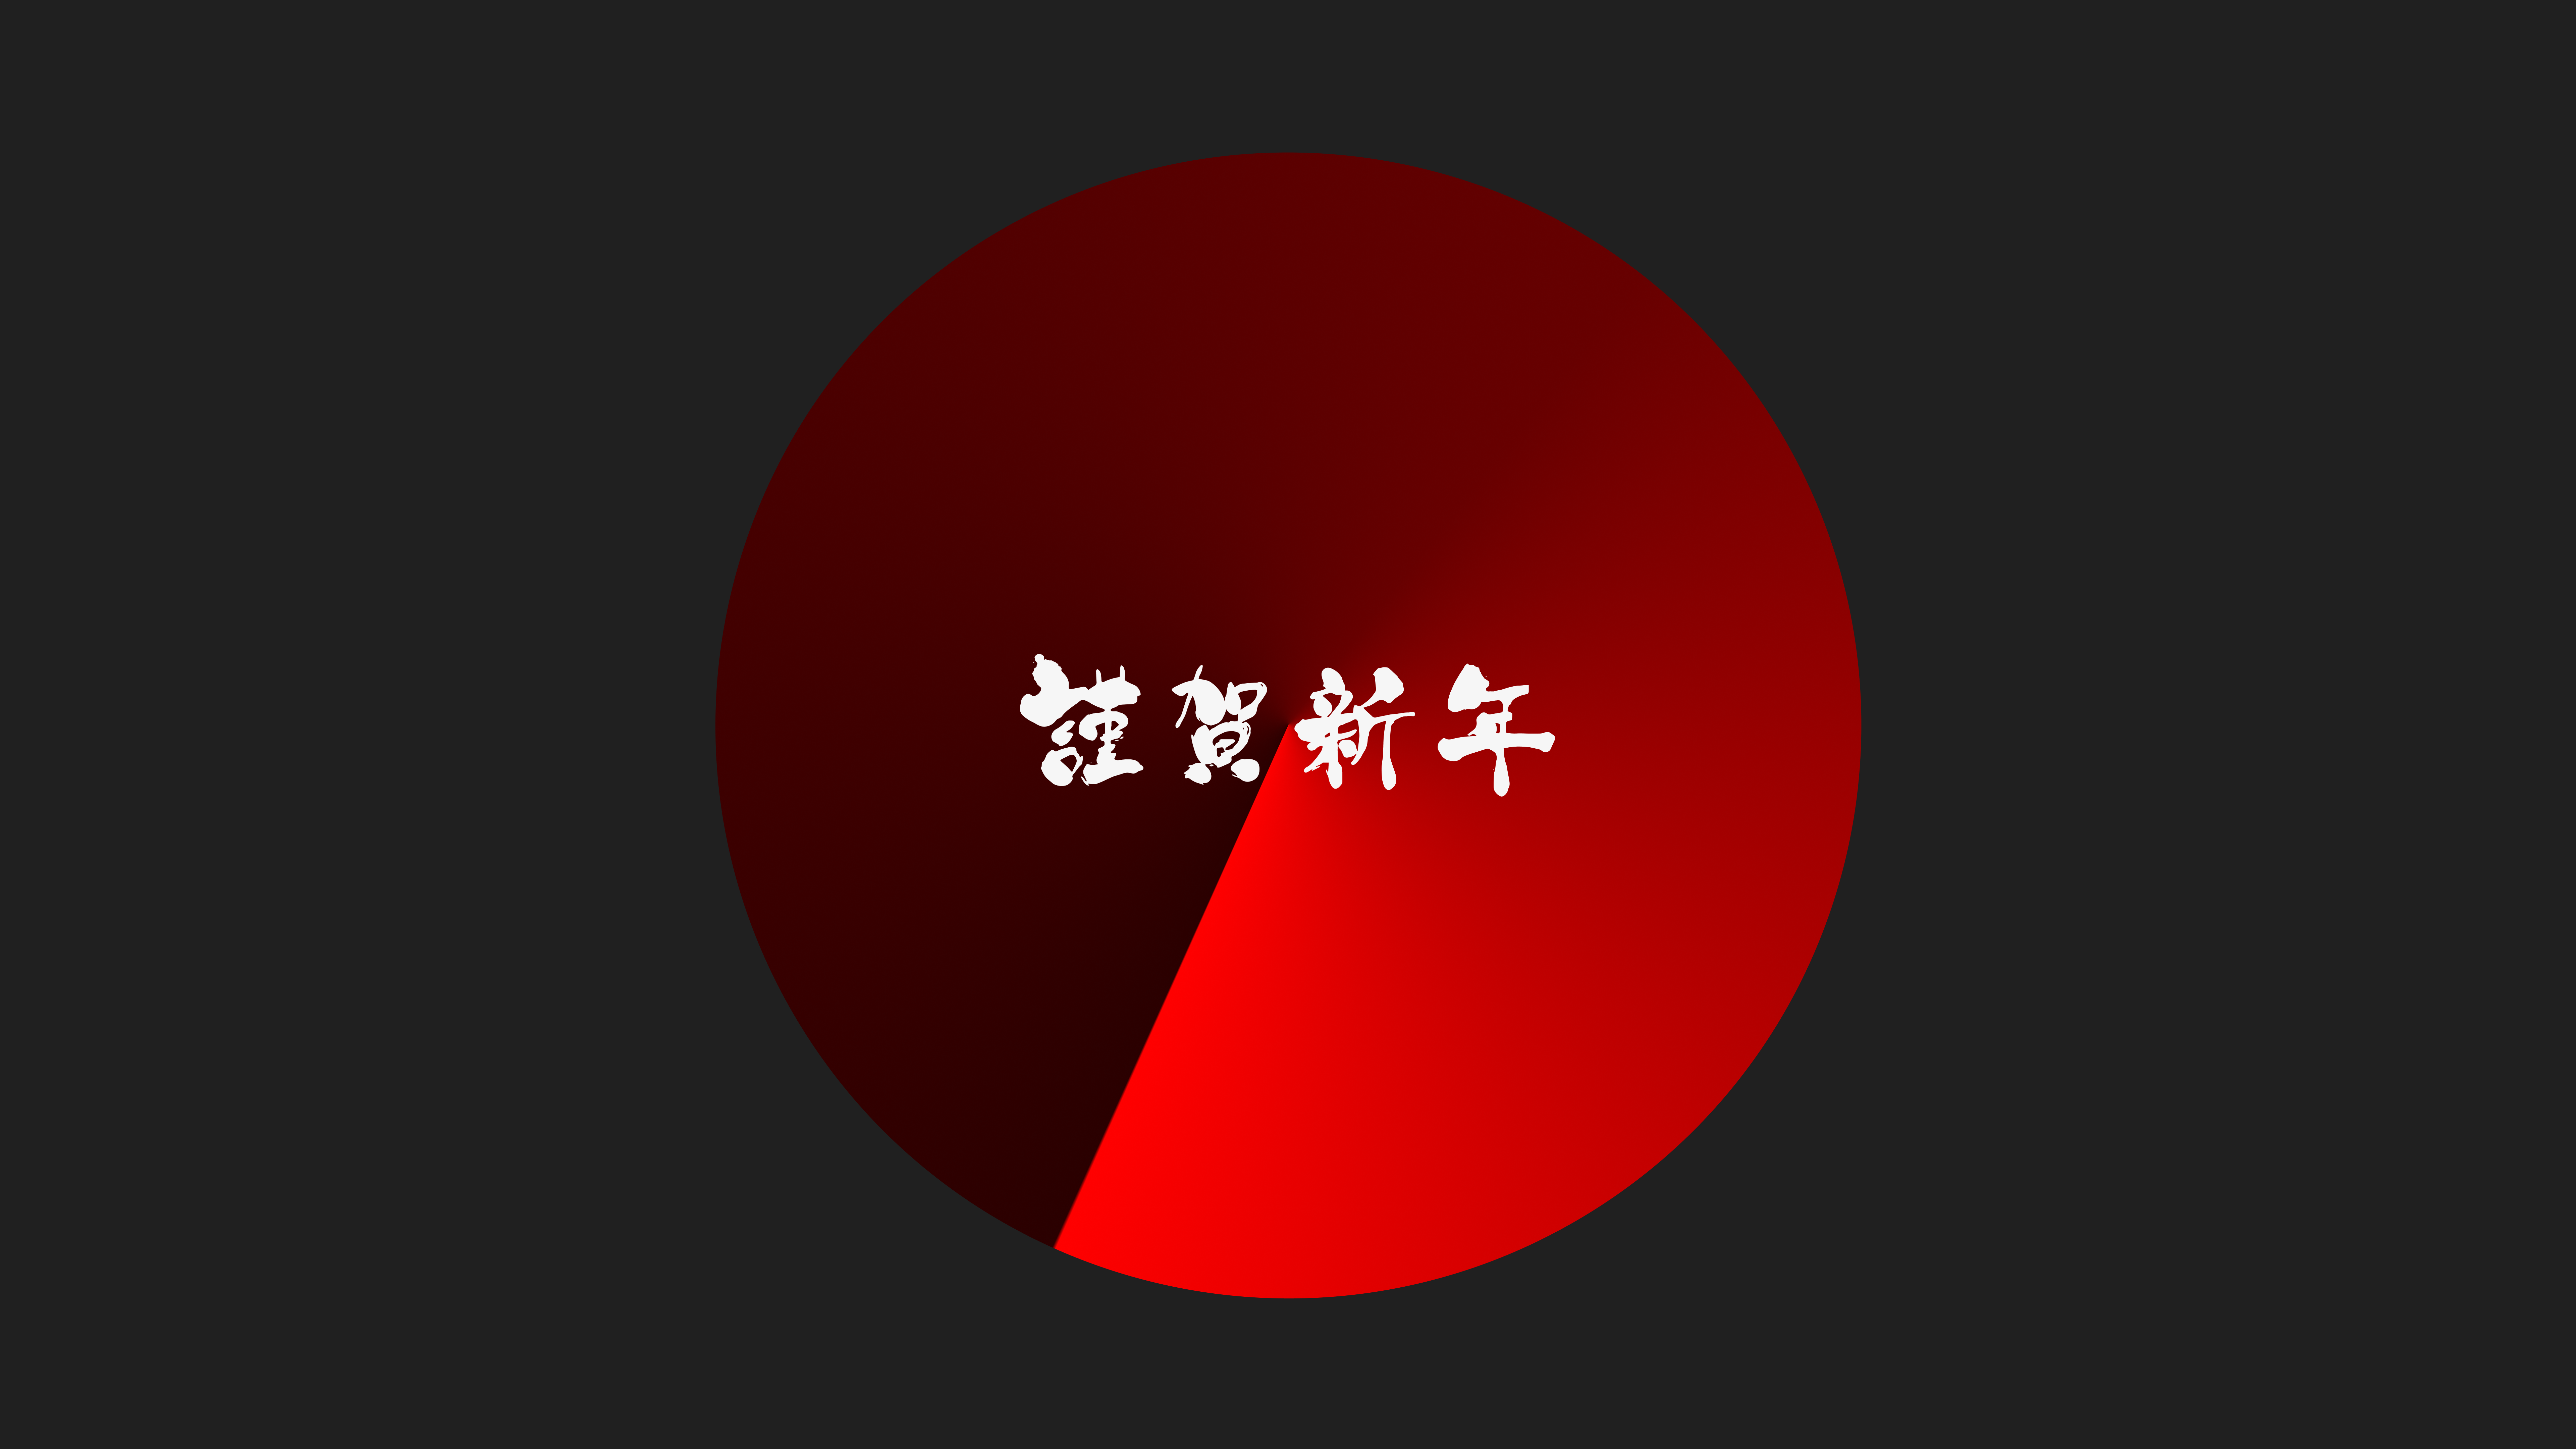 General 7680x4320 minimalism red gray background gradient New Year